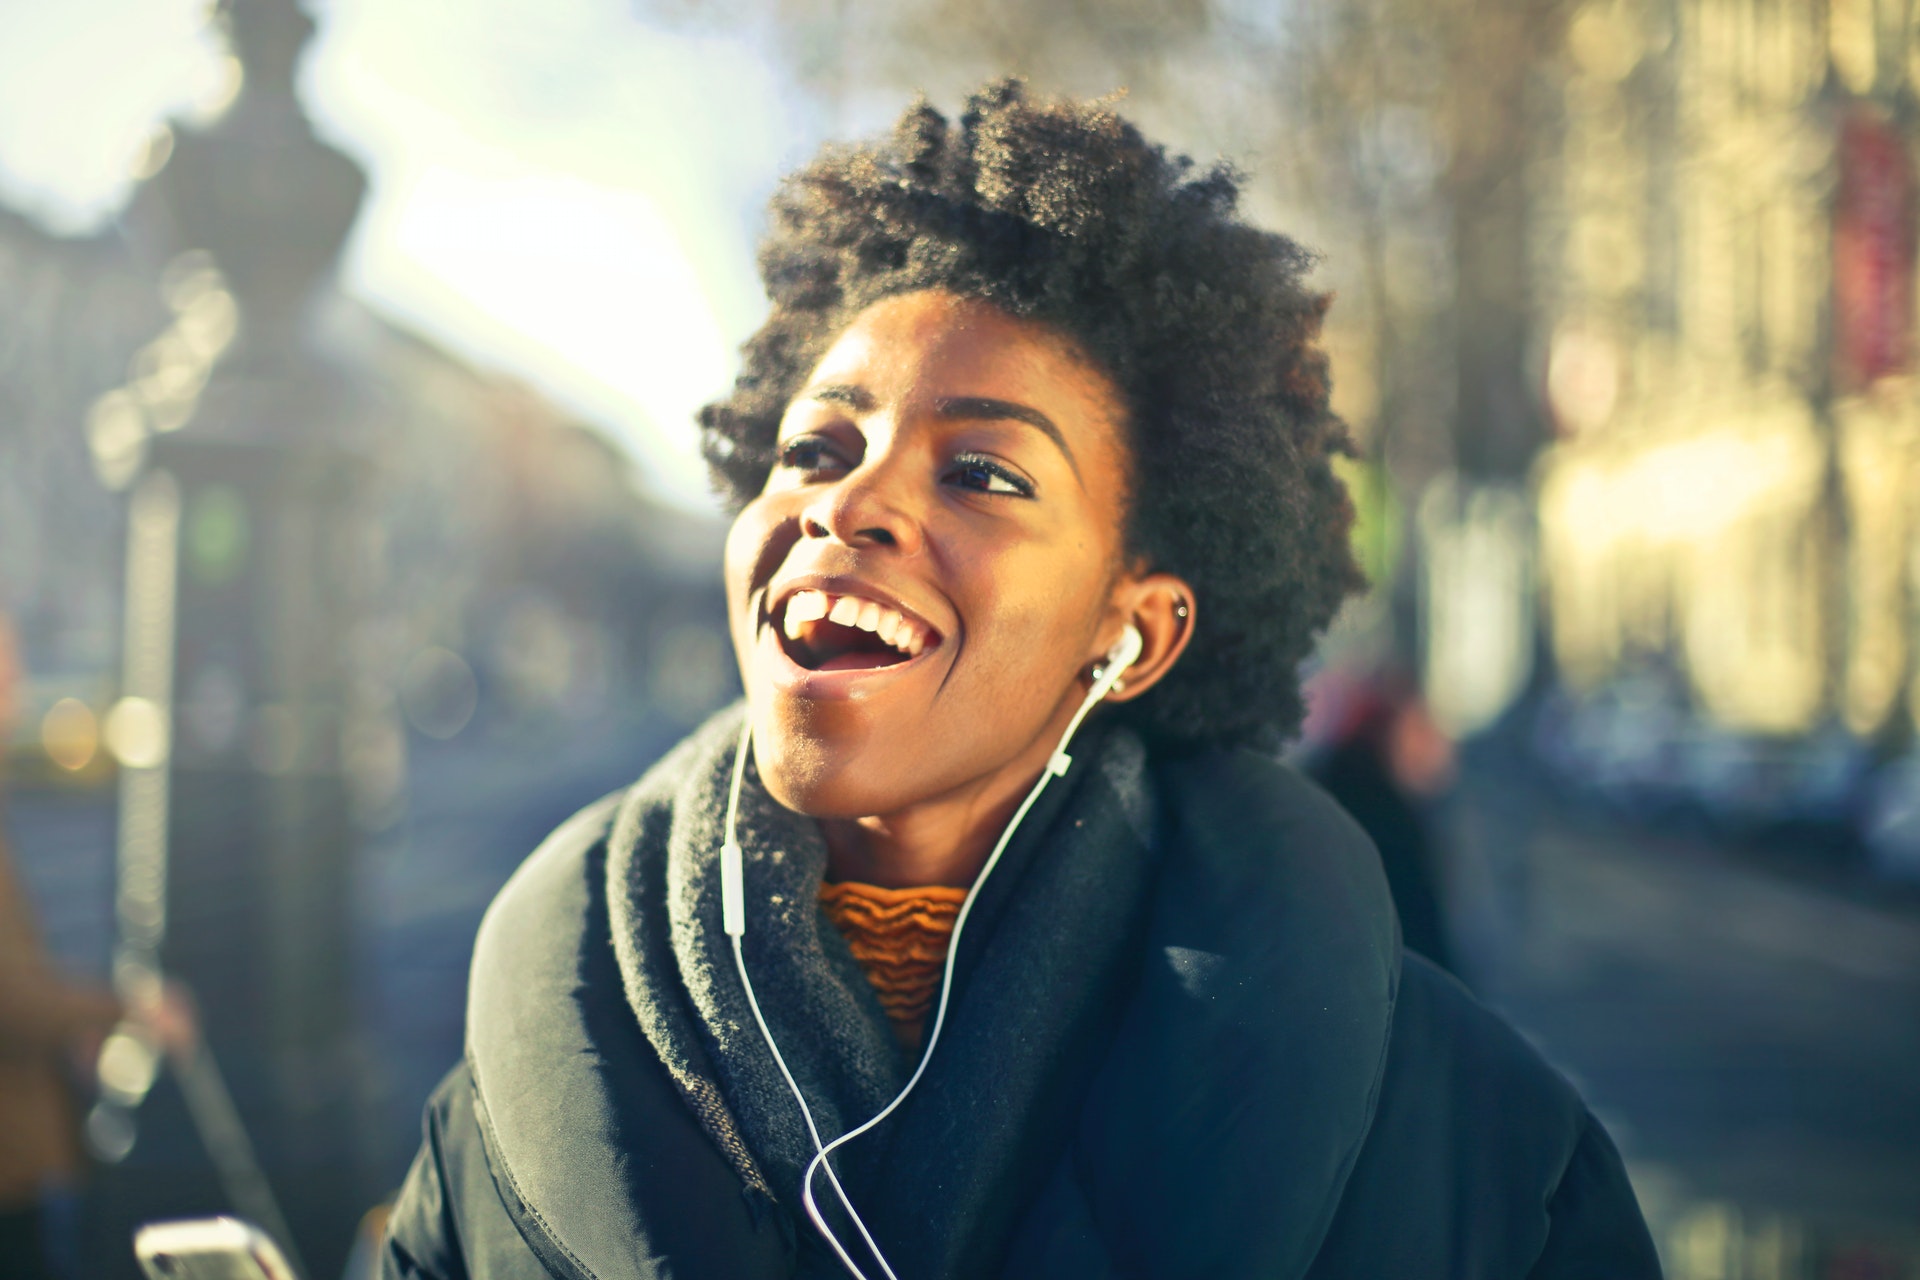 In-ear headphones | Photo by Andrea Piacquadio from Pexels